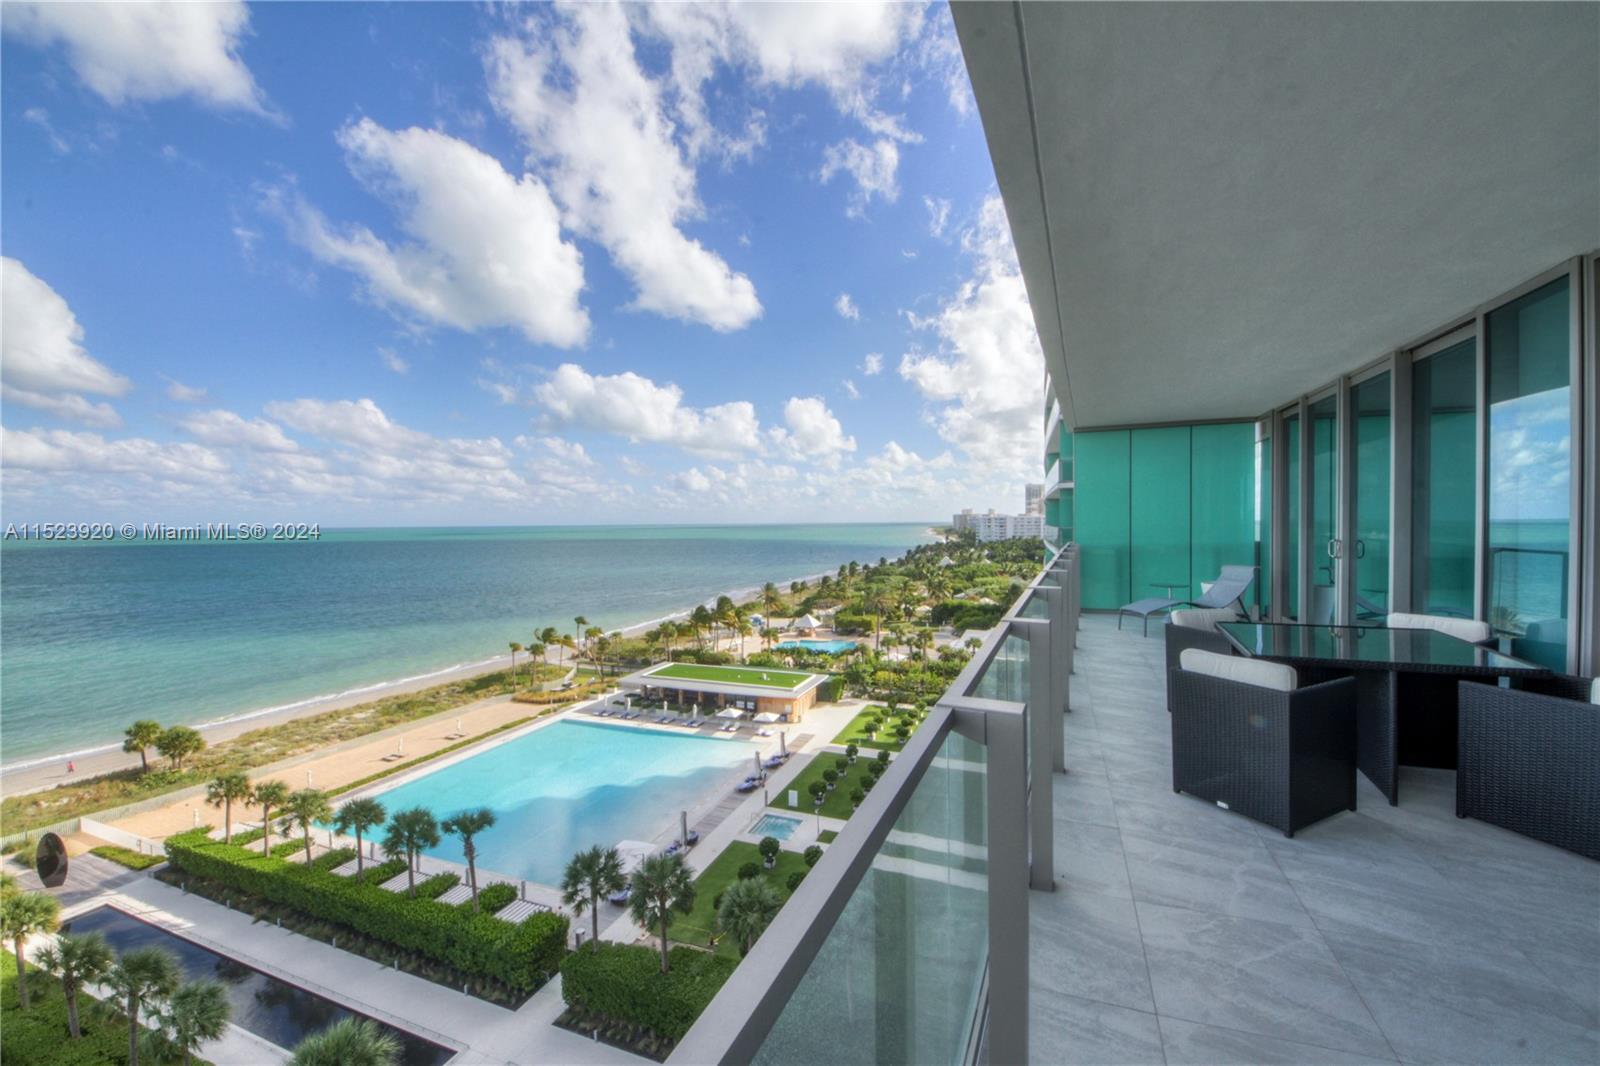 Enjoy breathtaking direct ocean views from this 2 Beds + den/ 3.5 Bath unit in the most luxurious & modern Residence complex in Key Biscayne. Fully furnished . Open Kitchen w/ top of the line appliances, laundry/service room & private elevator. Italian porcelain resembling wood throughout & many upgrades. Hear the ocean sound from your oversized balcony. Enjoy upscale resort living: infinity pool, state of the art gym/spa, restaurant, putting green & more. Price varies base on length of stay. Call me Today!